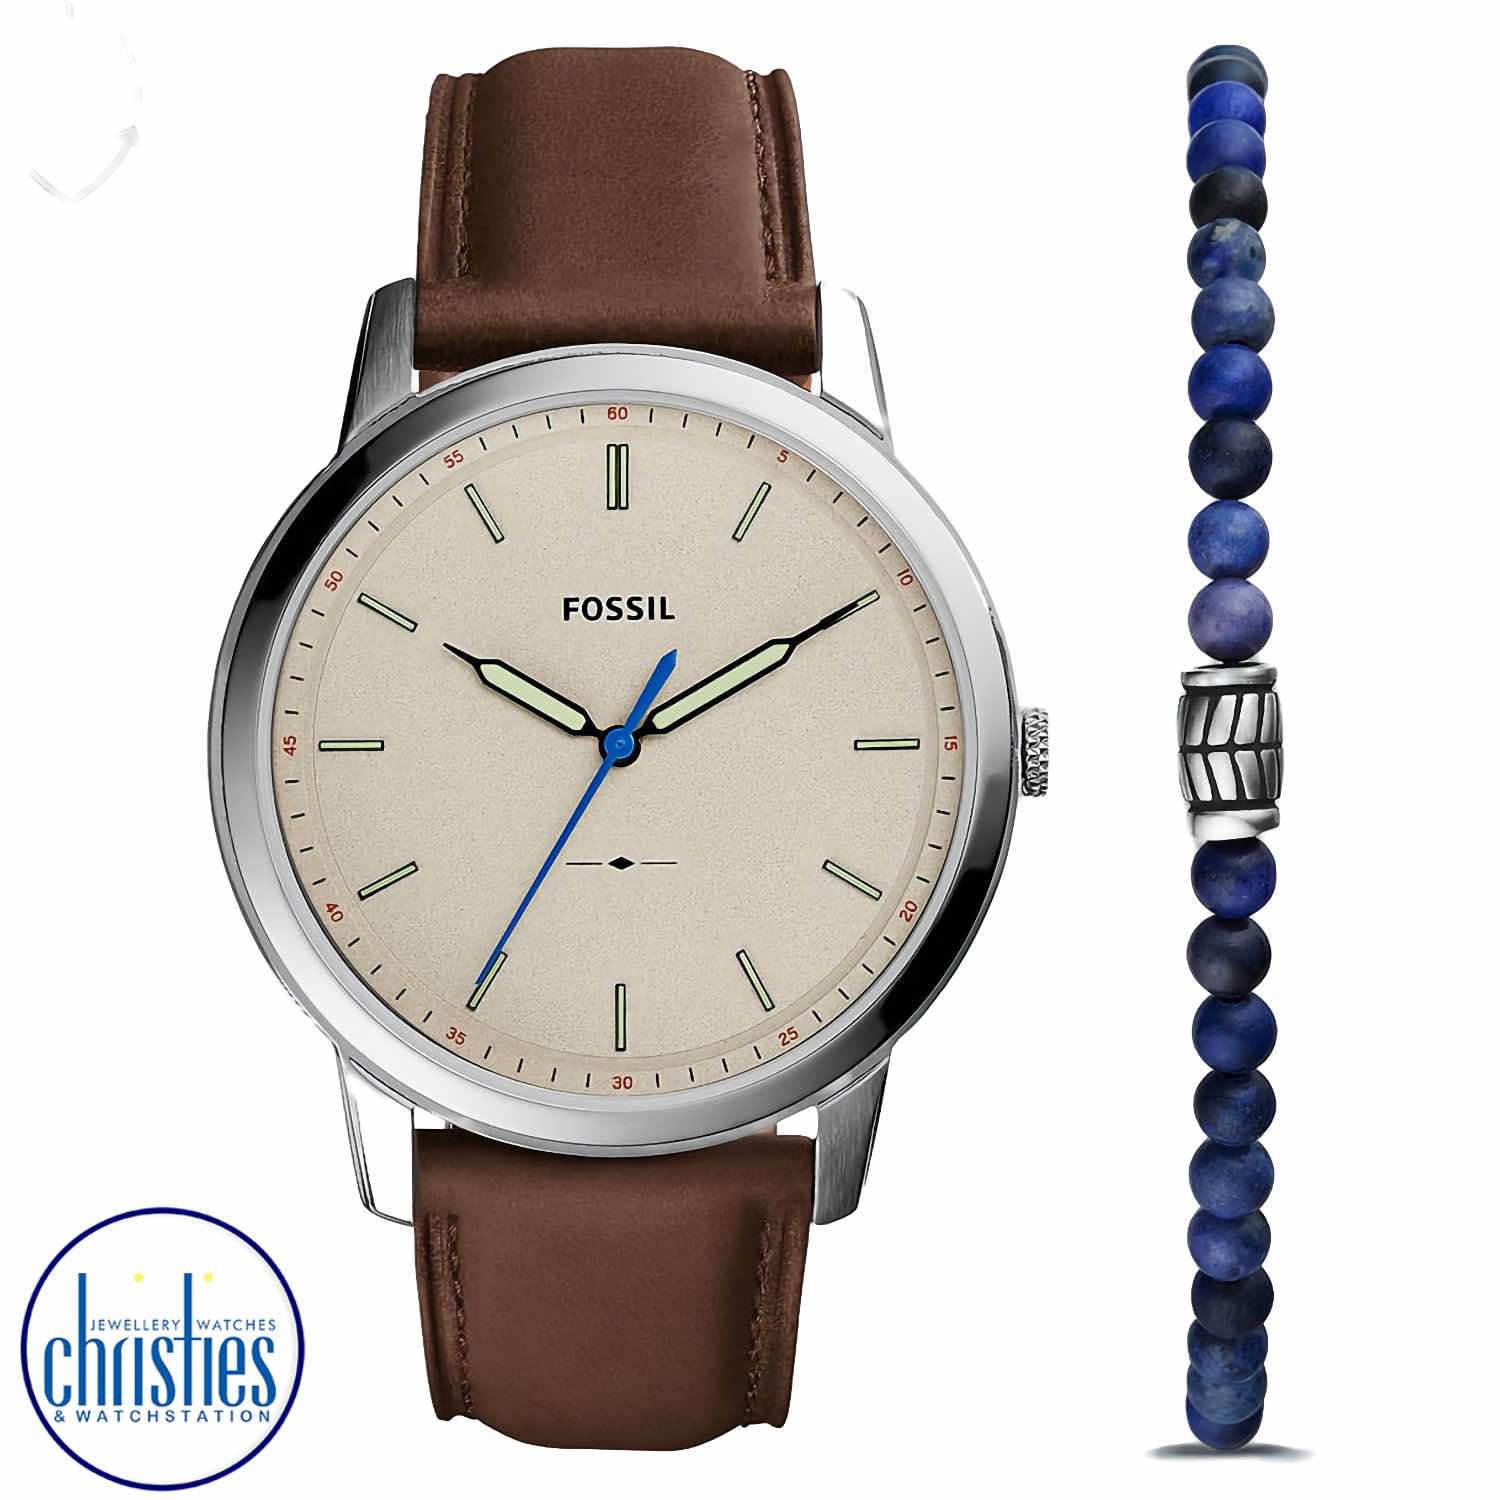 FS5966SET Fossil Minmalist Three-Hand Brown Eco Leather Watch and Bracelet Set. FS5967SET Fossil Townsman Chronograph Brown Eco Leather Watch and Bracelet SetAfterpay - Split your purchase into 4 instalments - Pay for your purchase over 4 instalments, due